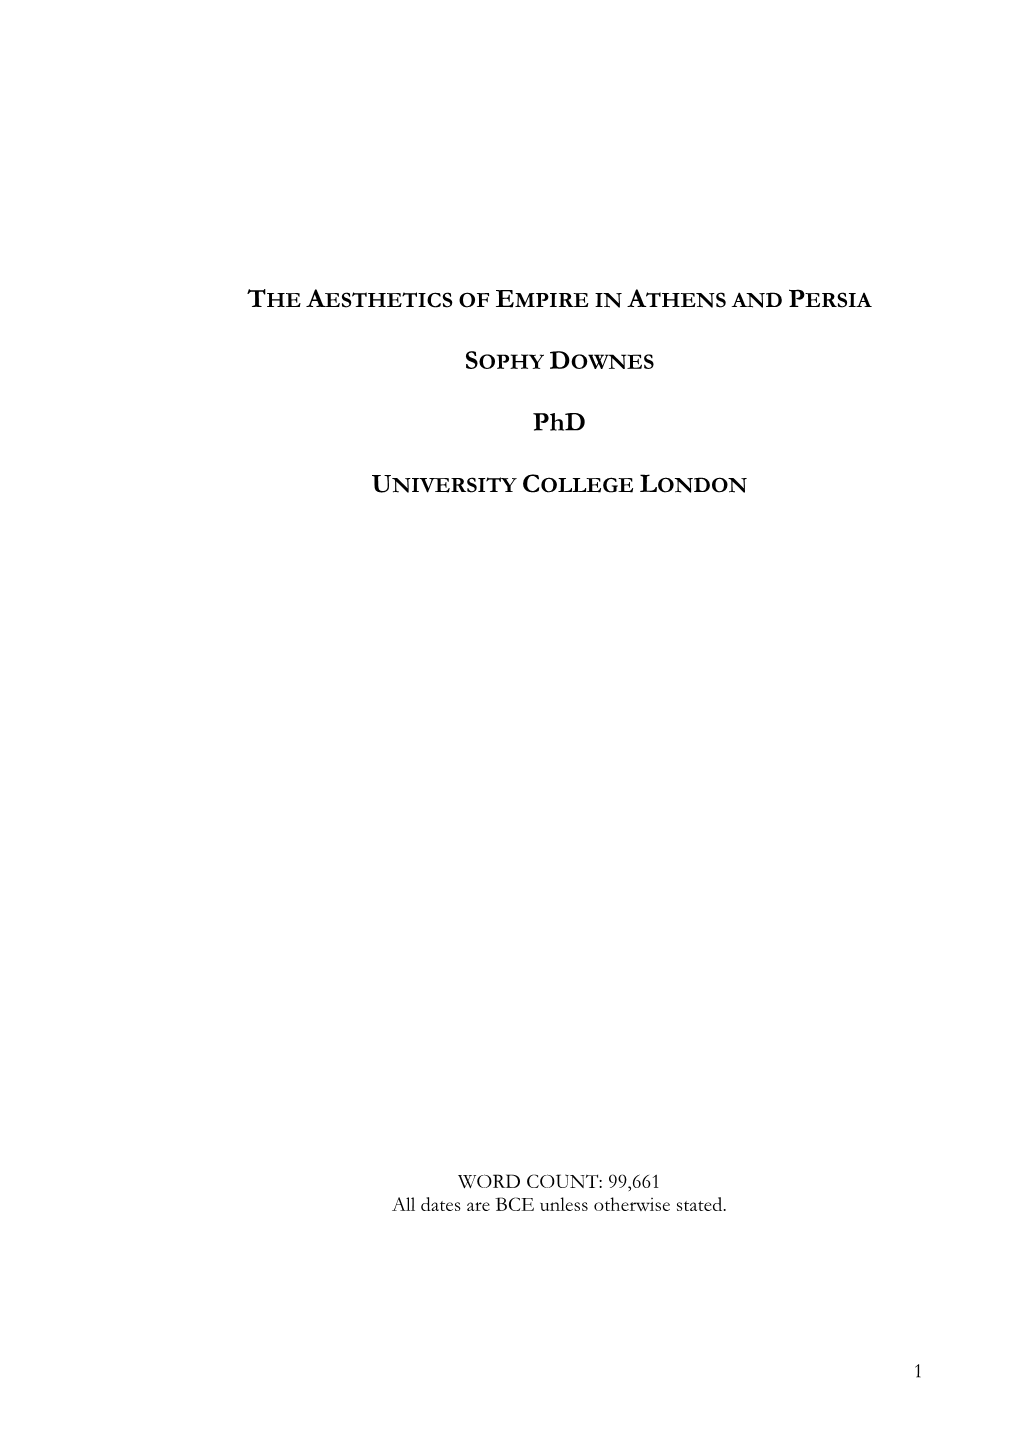 The Aesthetics of Empire in Athens and Persia